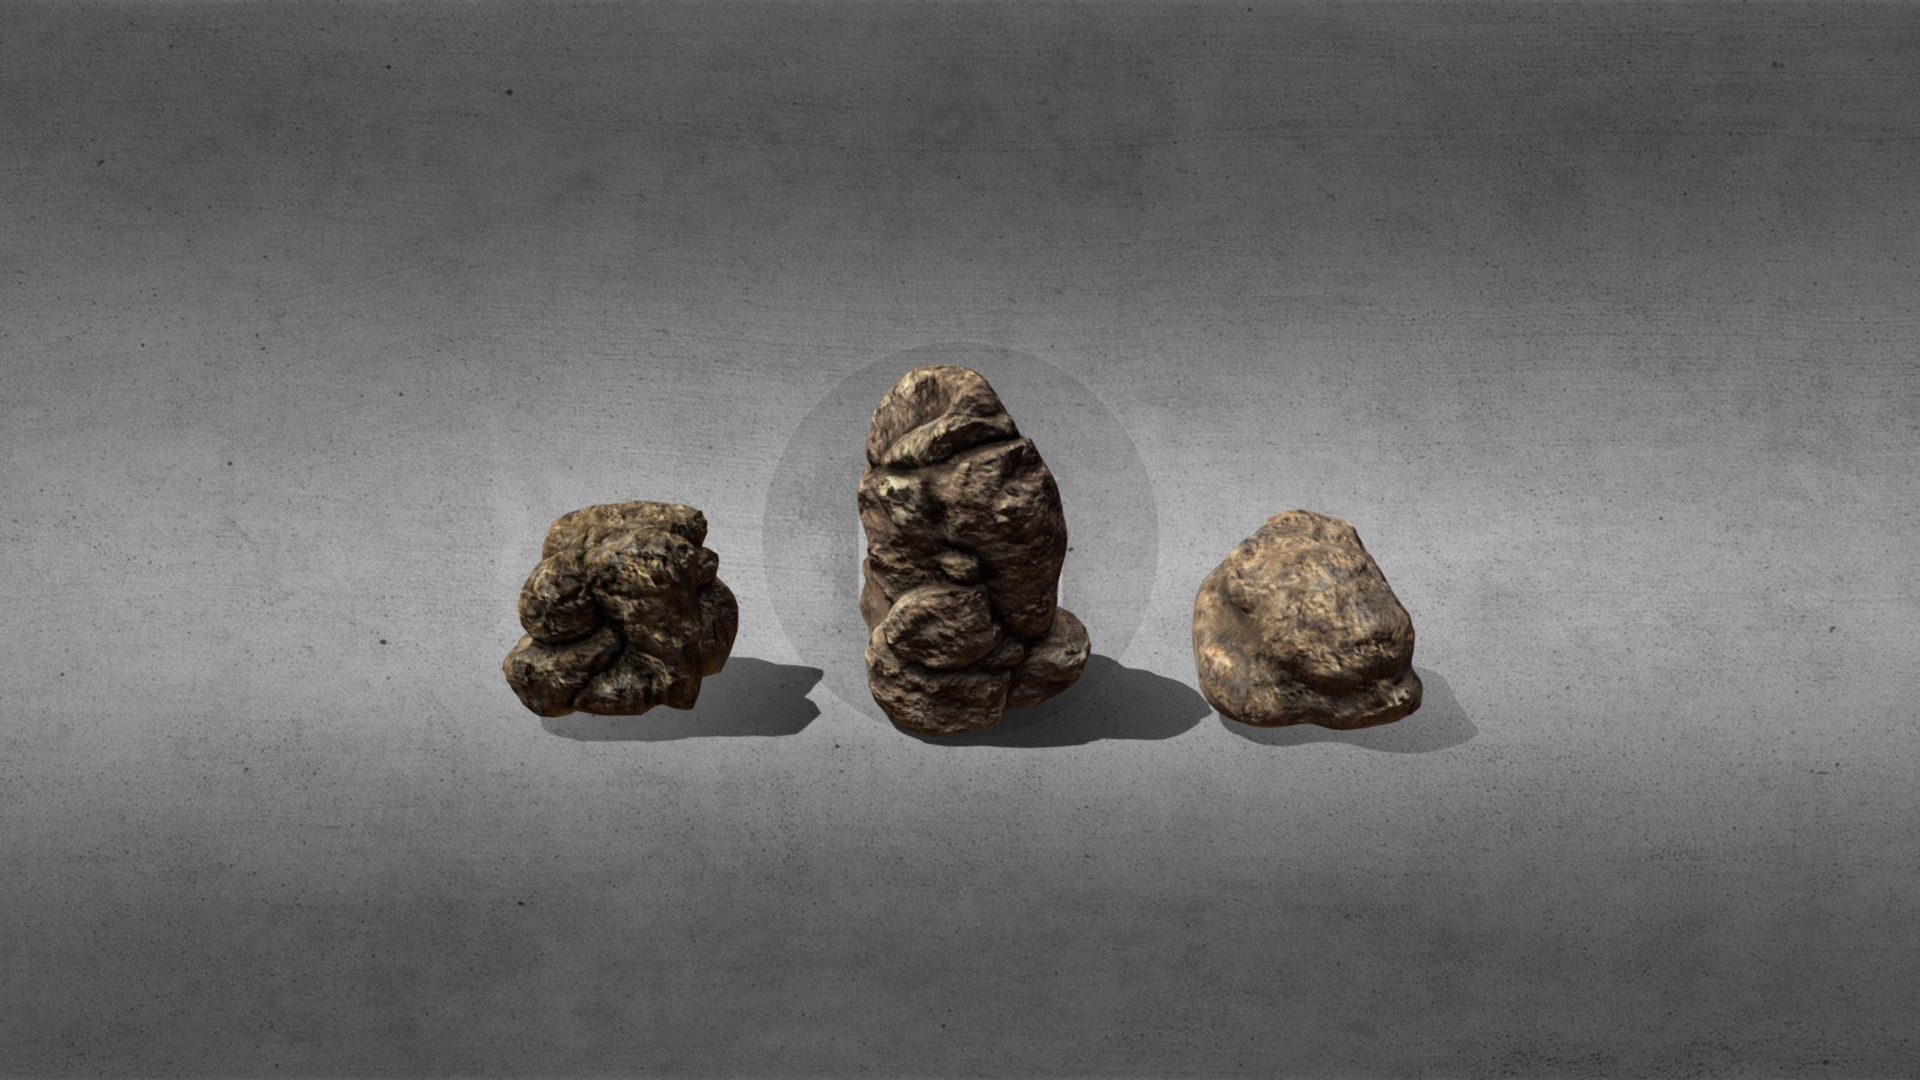 3D model Desert Rocks - This is a 3D model of the Desert Rocks. The 3D model is about a group of rocks on a grey surface.